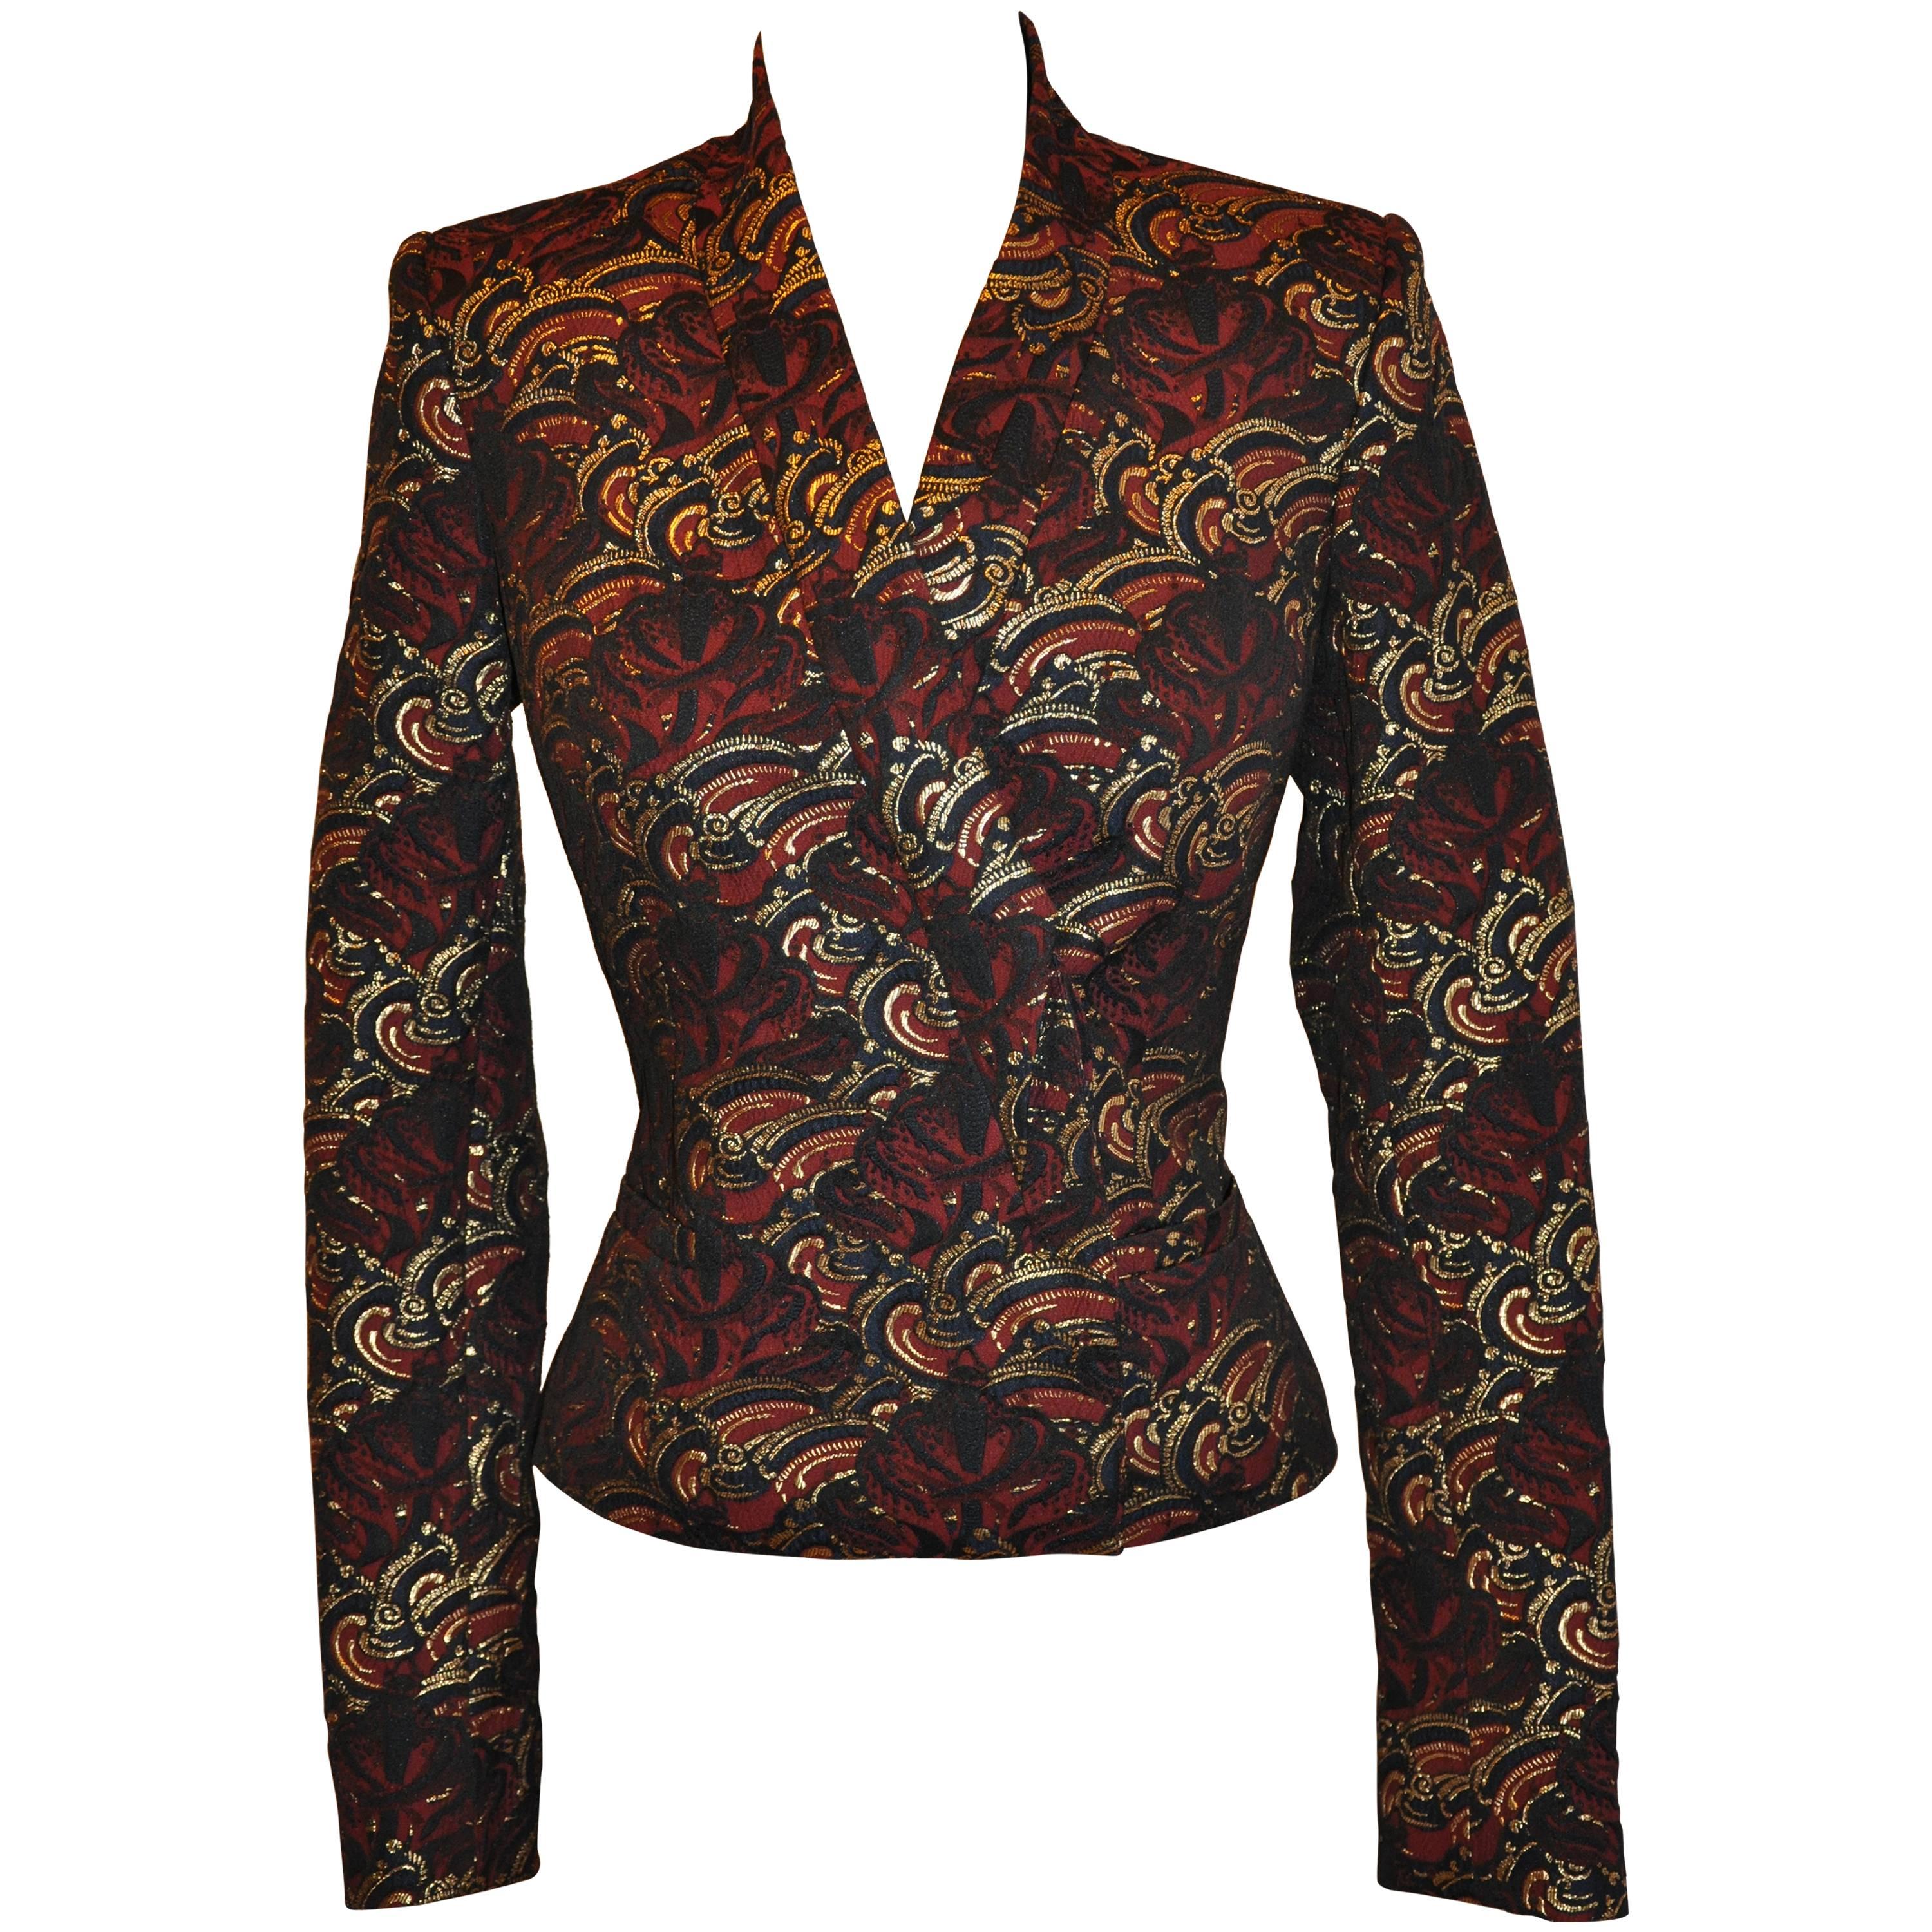 Kenzo Multi-Color Accented with Metallic Gold Evening Jacket 